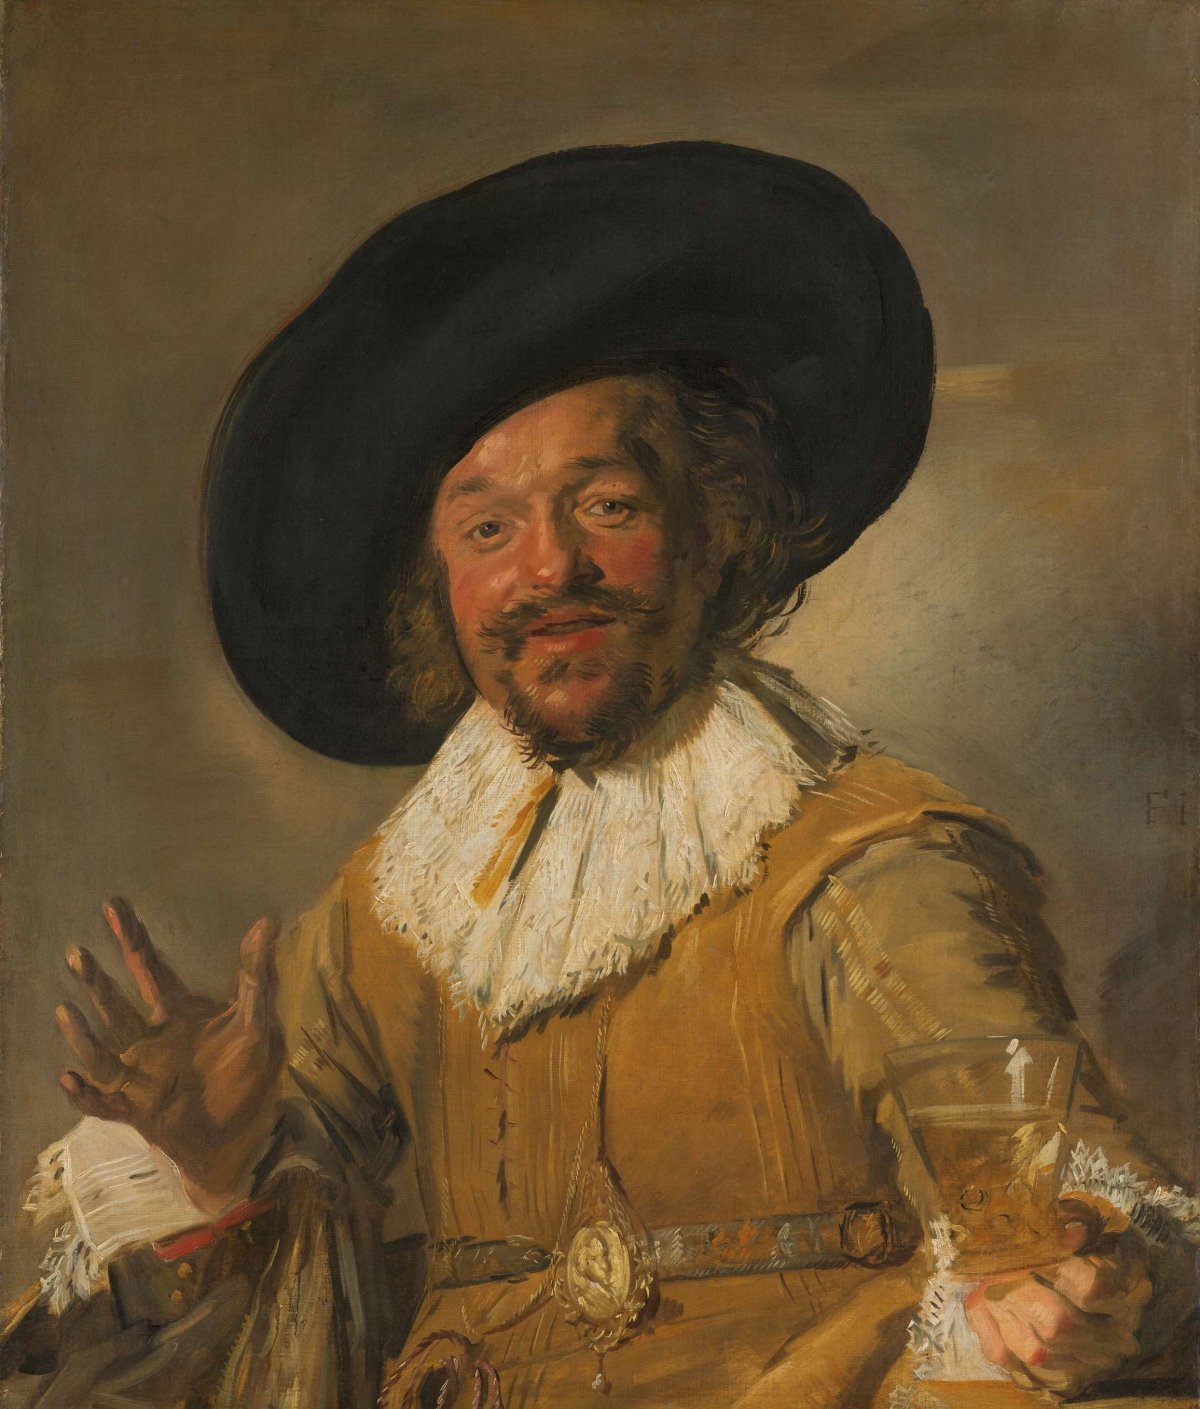 A Militiaman Holding a Berkemeyer, Known as the ‘Merry Drinker’, Frans Hals, c. 1628 - c. 1630